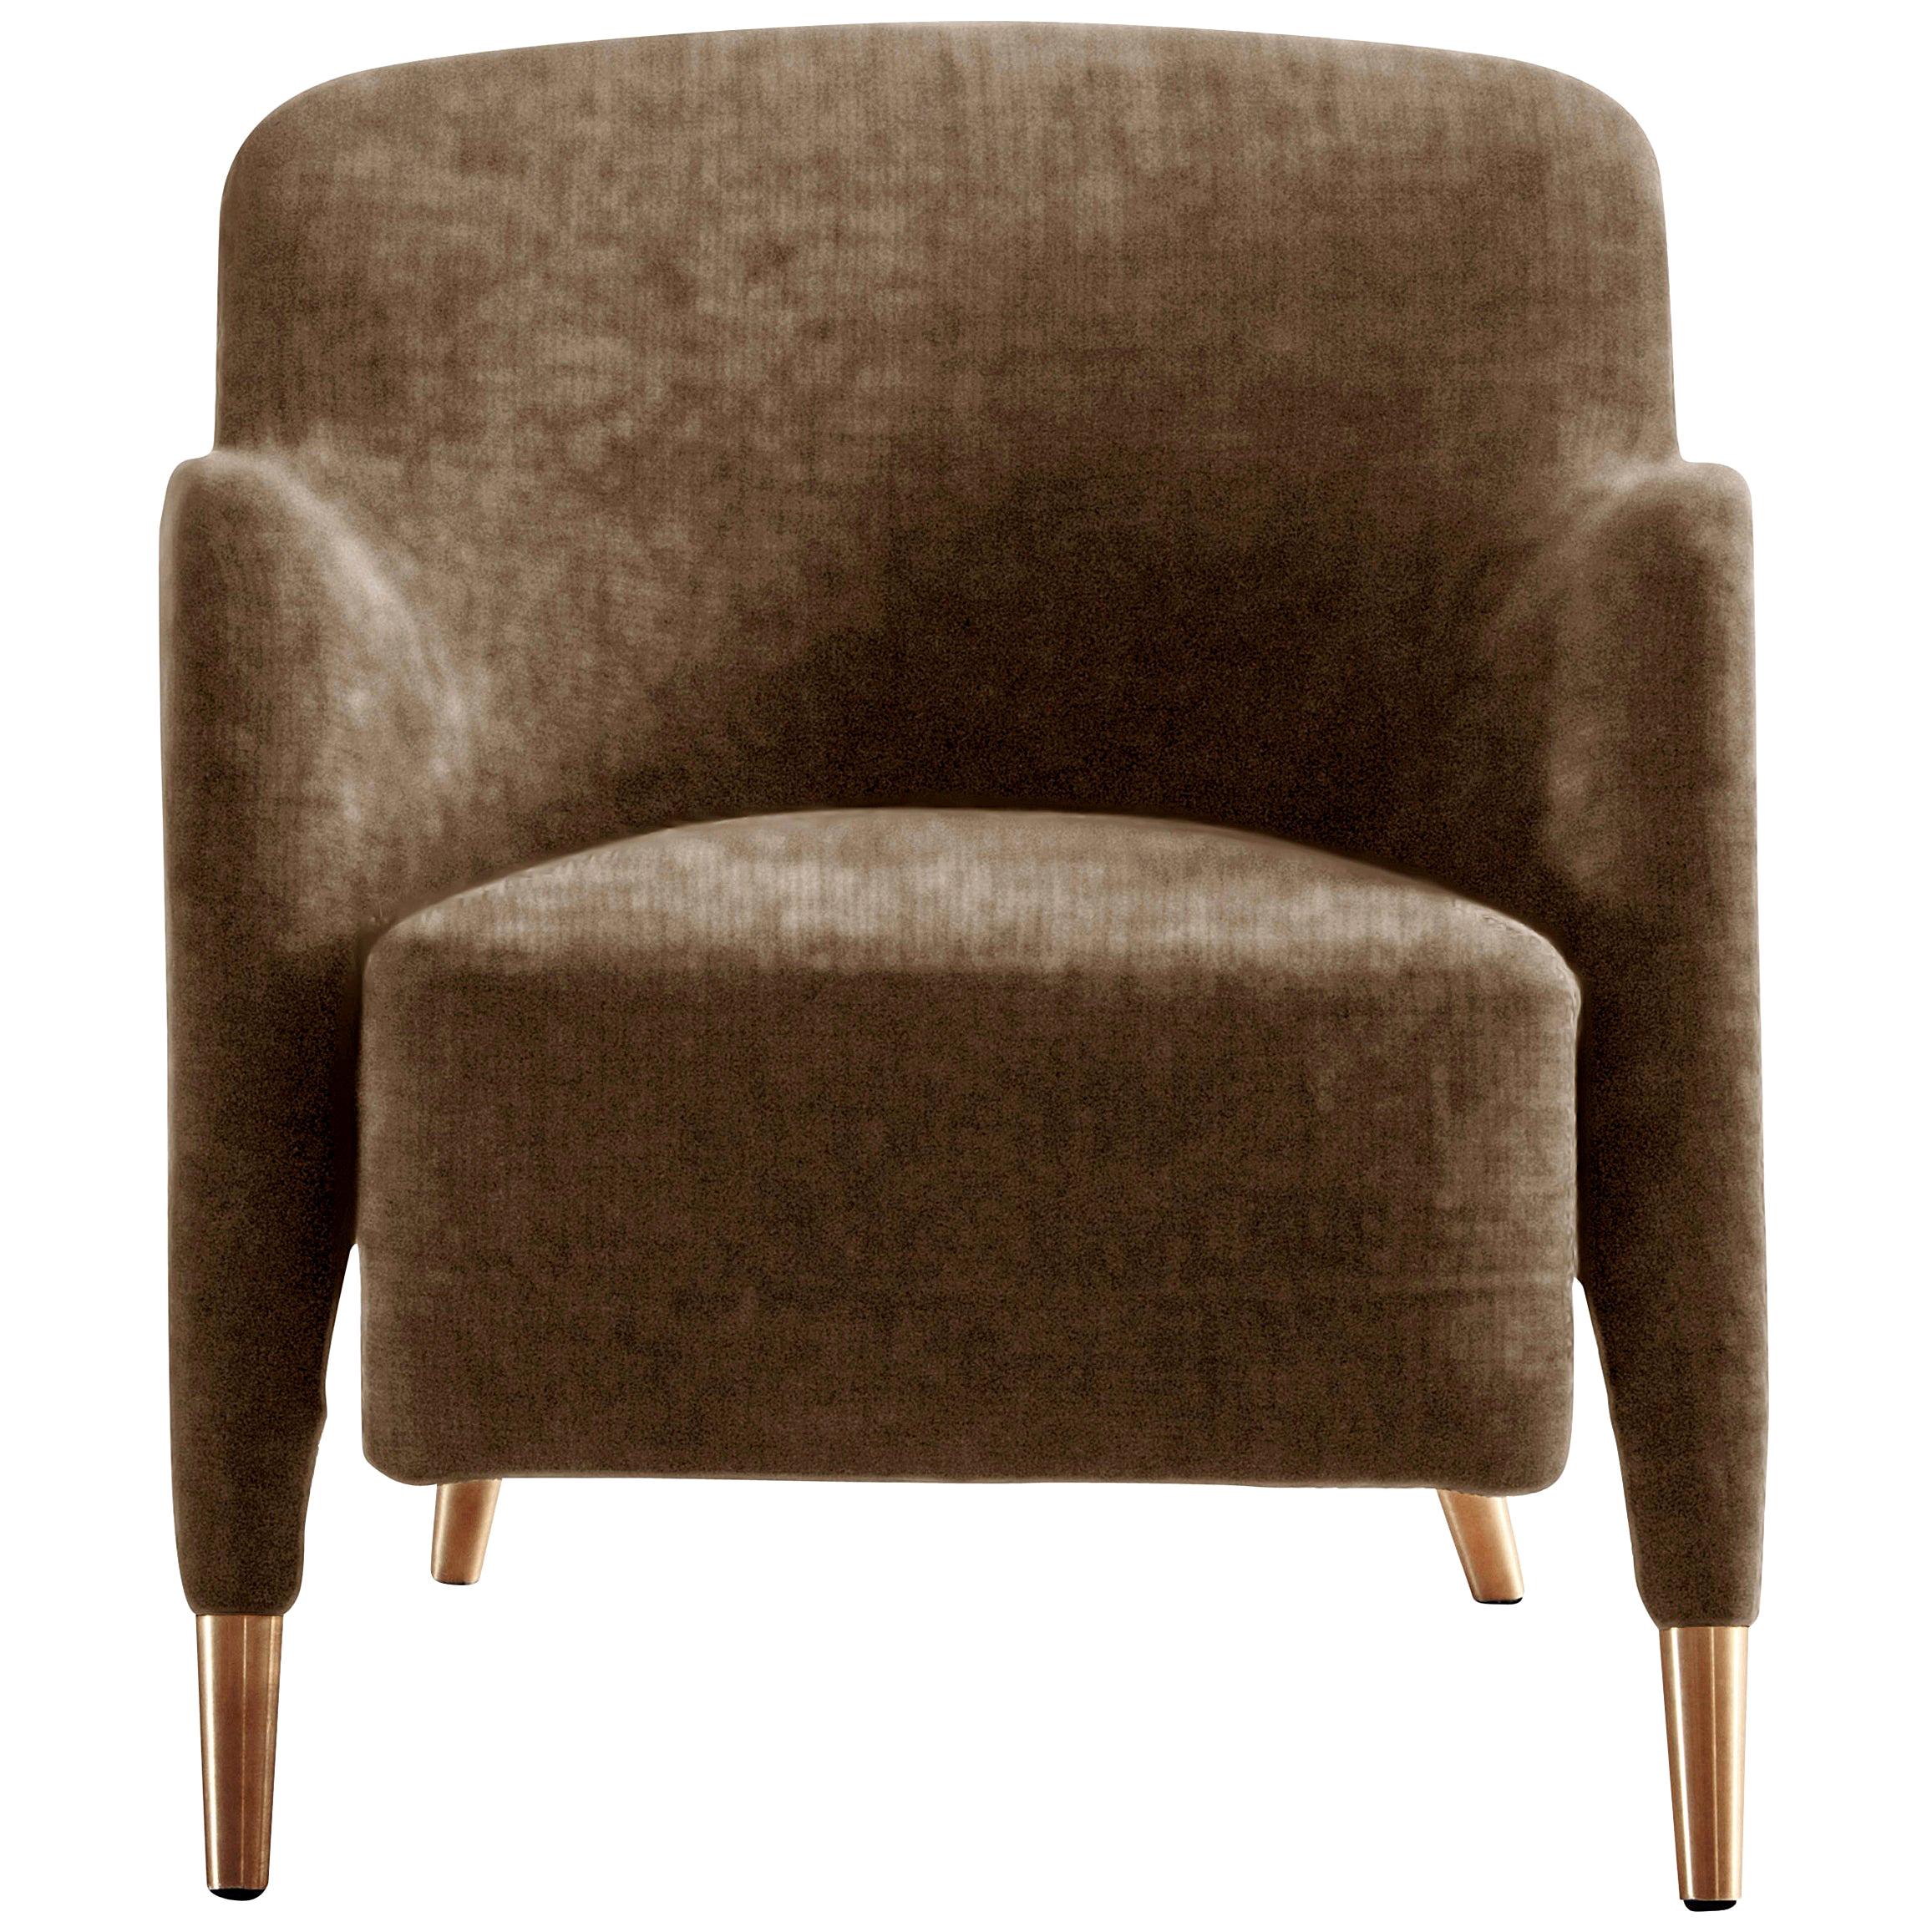 Molteni&C D.151.4 Armchair in Taupe Leather by Gio Ponti